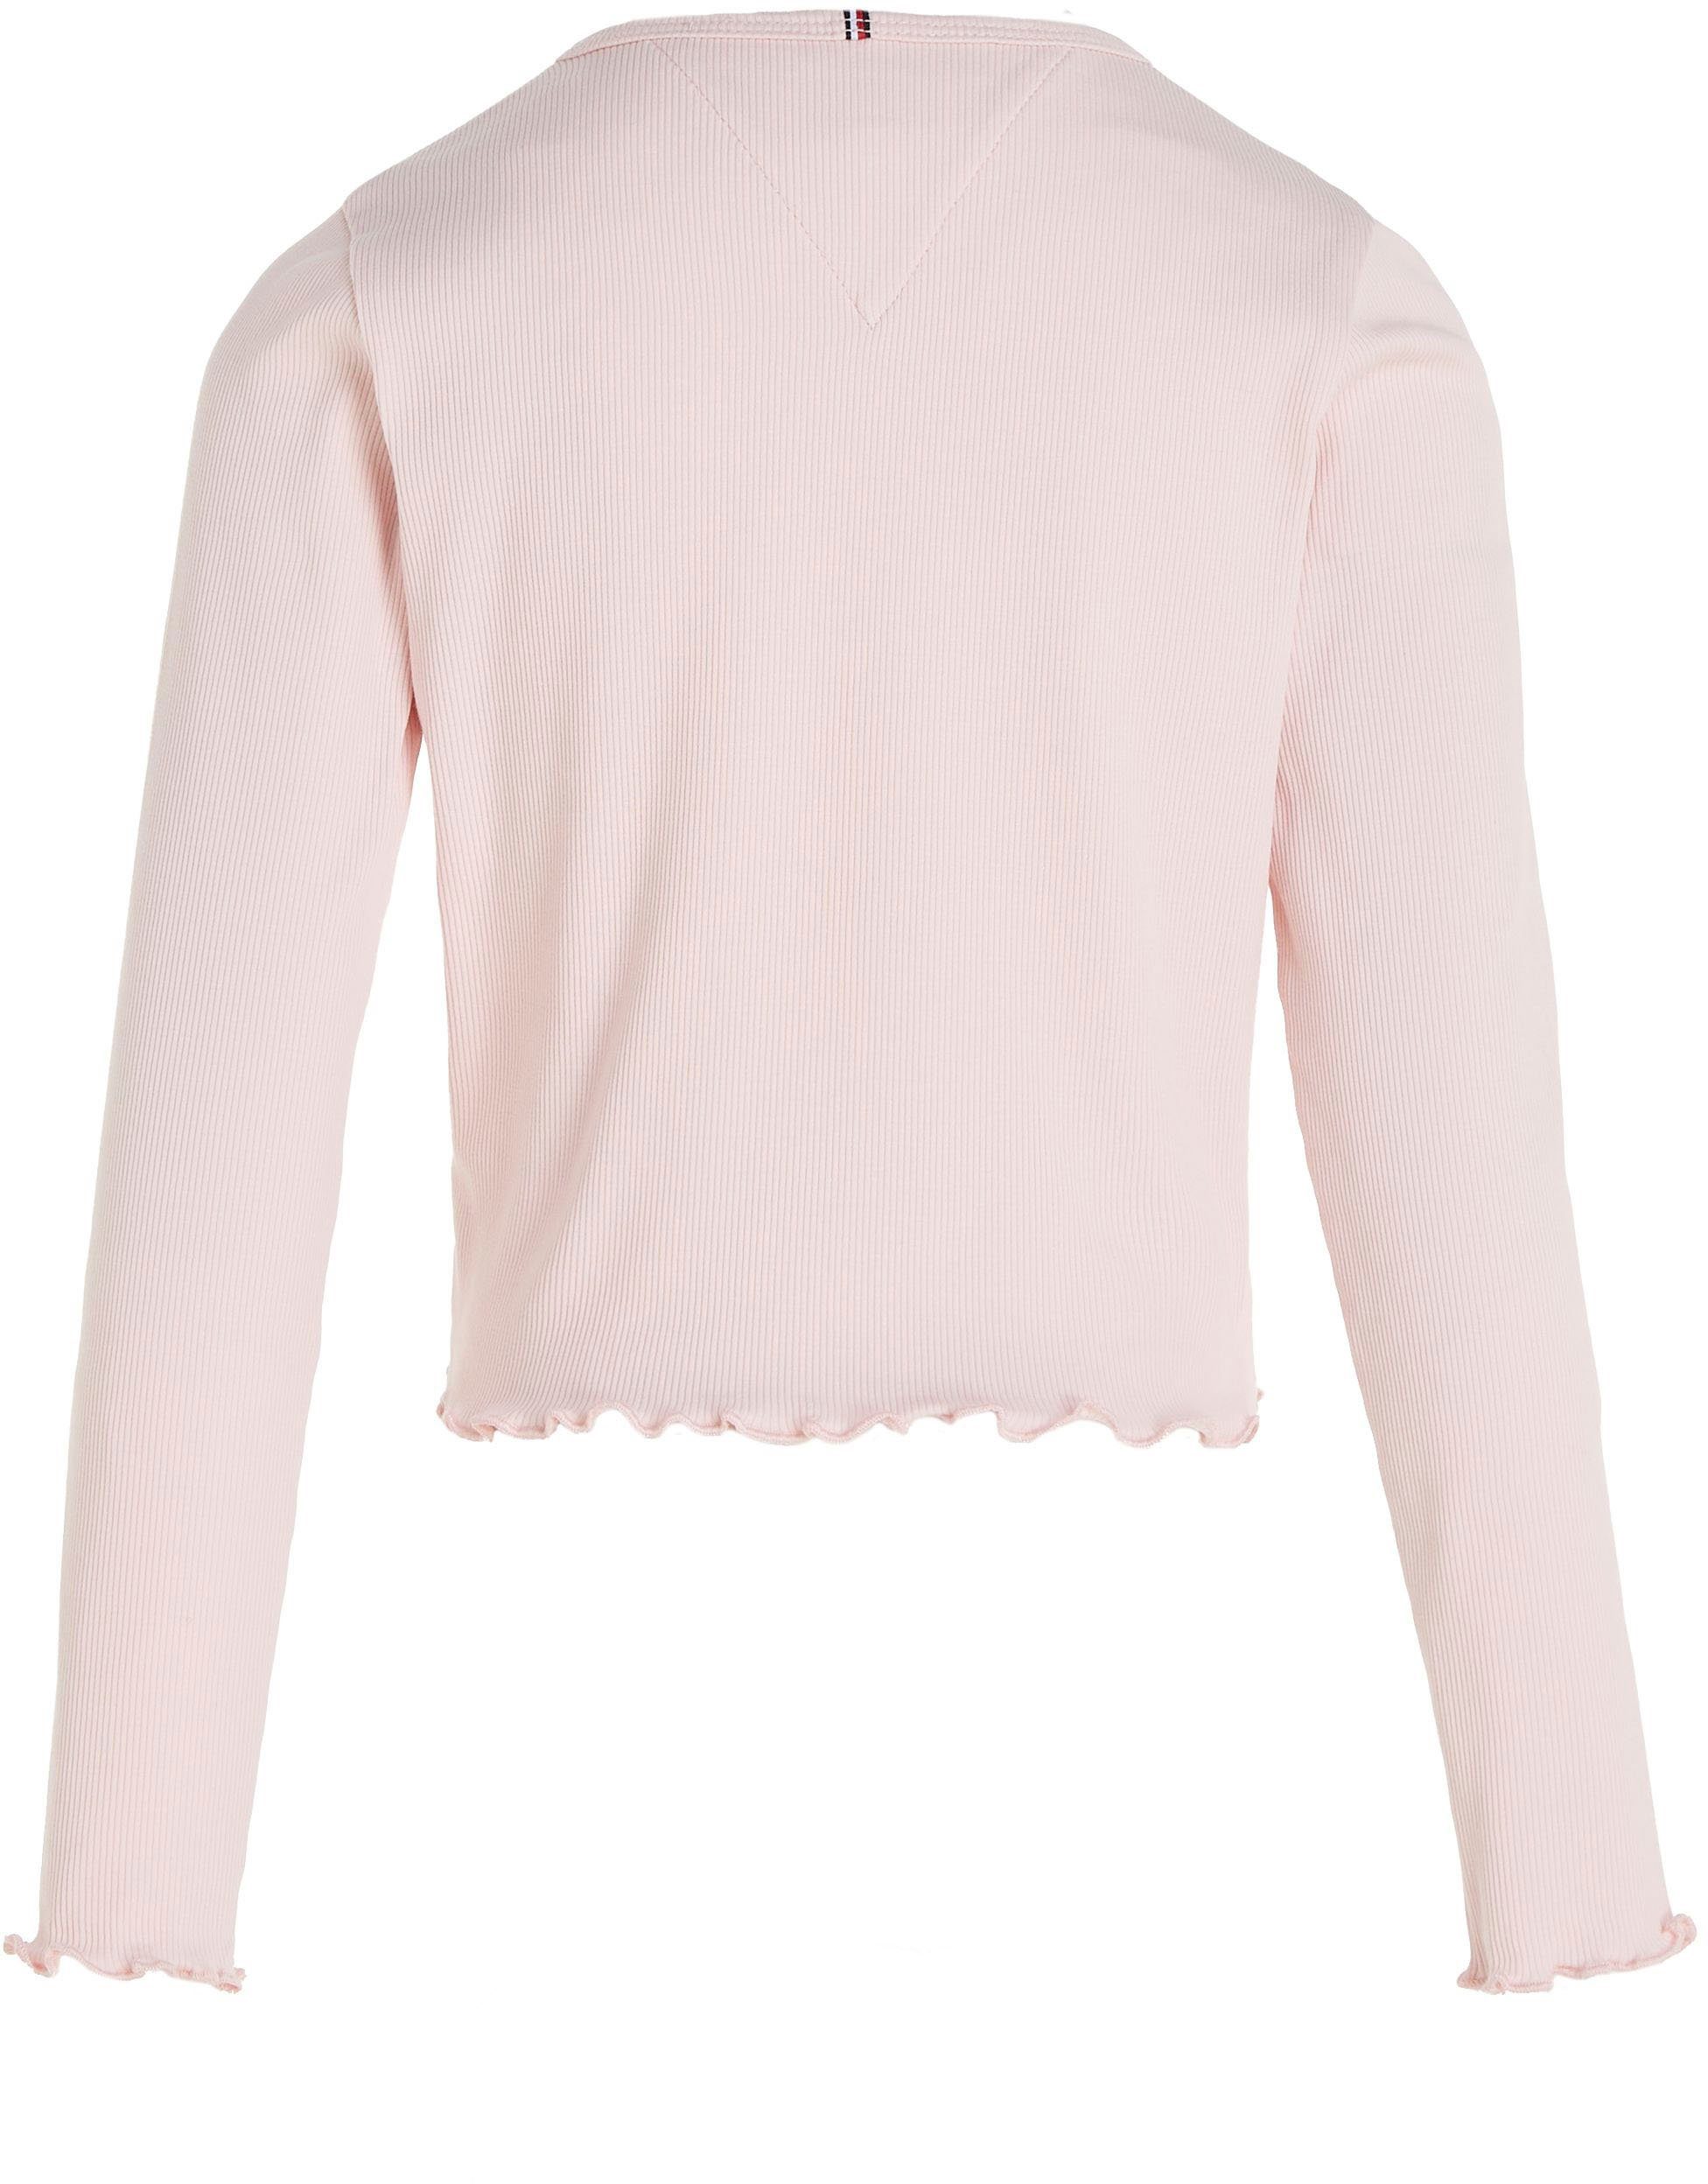 Tommy TOP Rippenstruktur RIB leichter L/S ESSENTIAL in Langarmshirt Hilfiger Whimsy_Pink